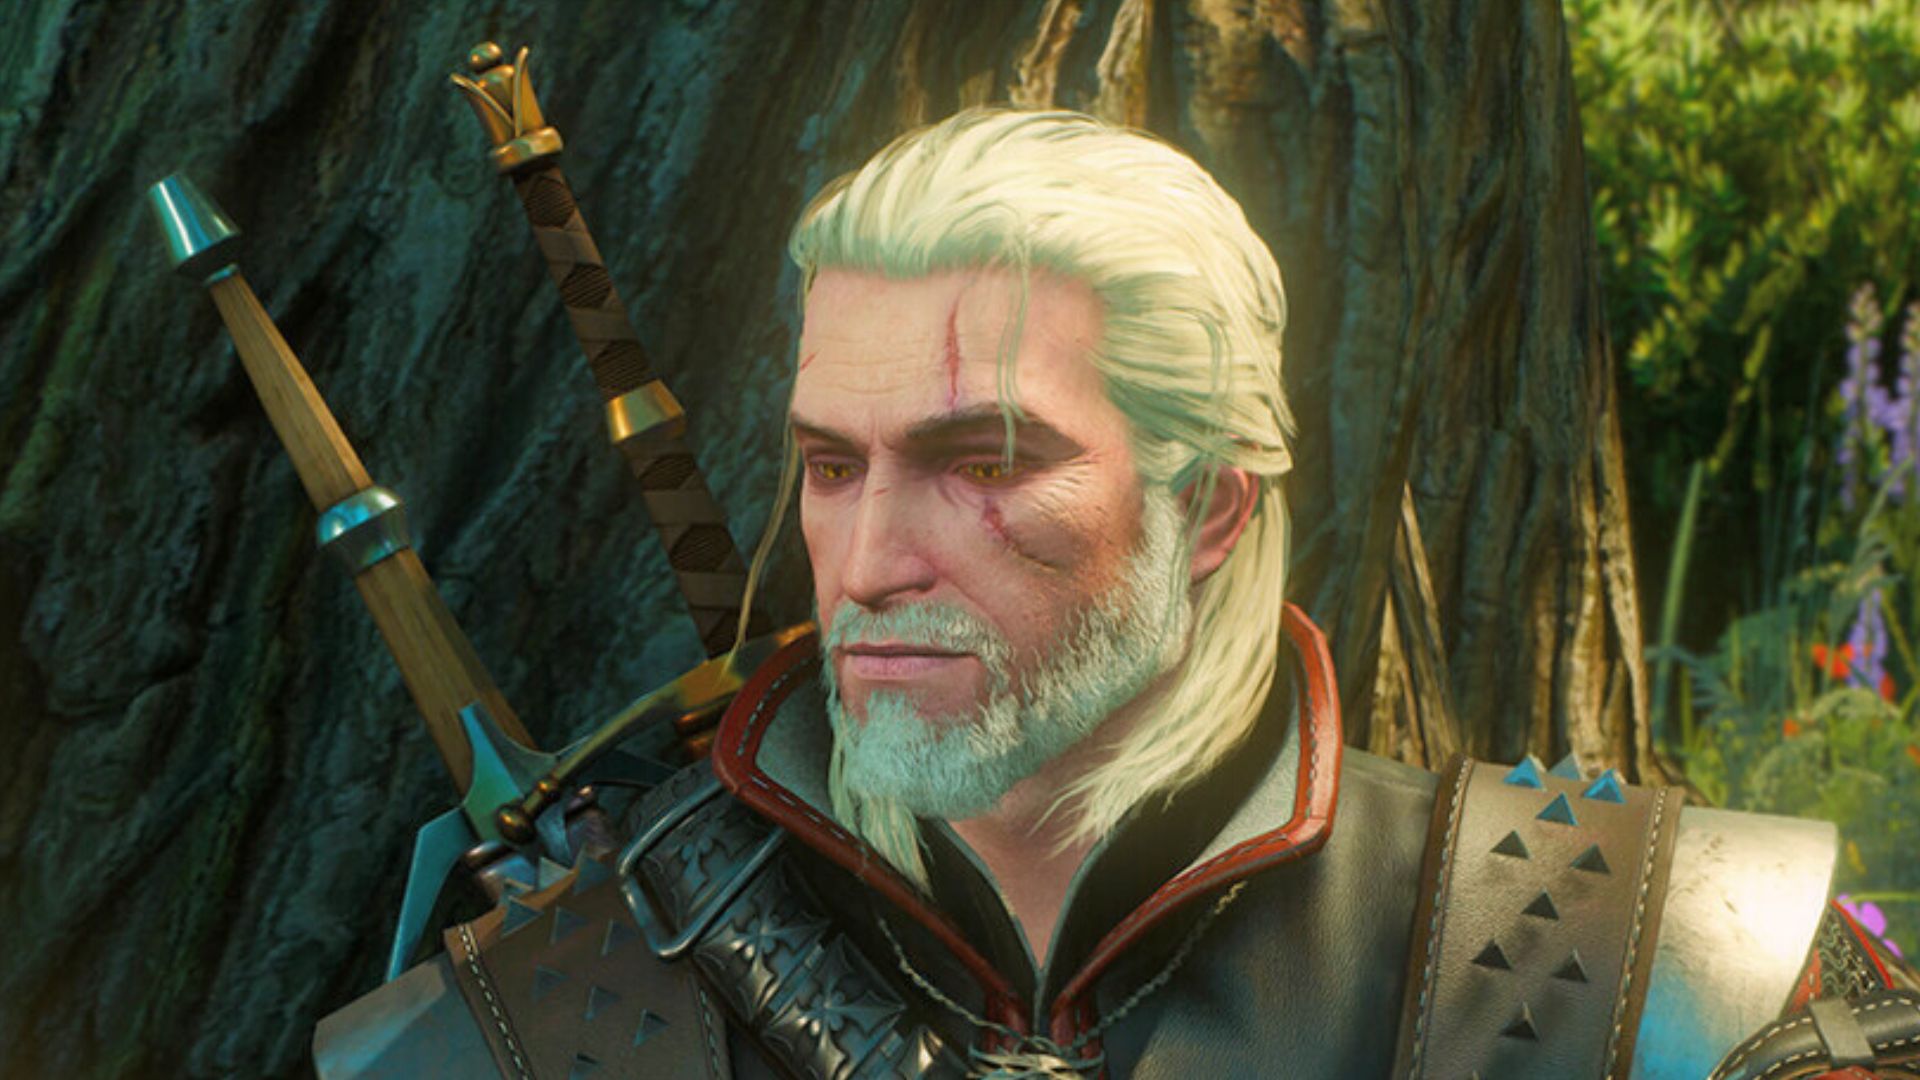 The Witcher 4 is ramping up at CDPR, with 400 devs on it this year